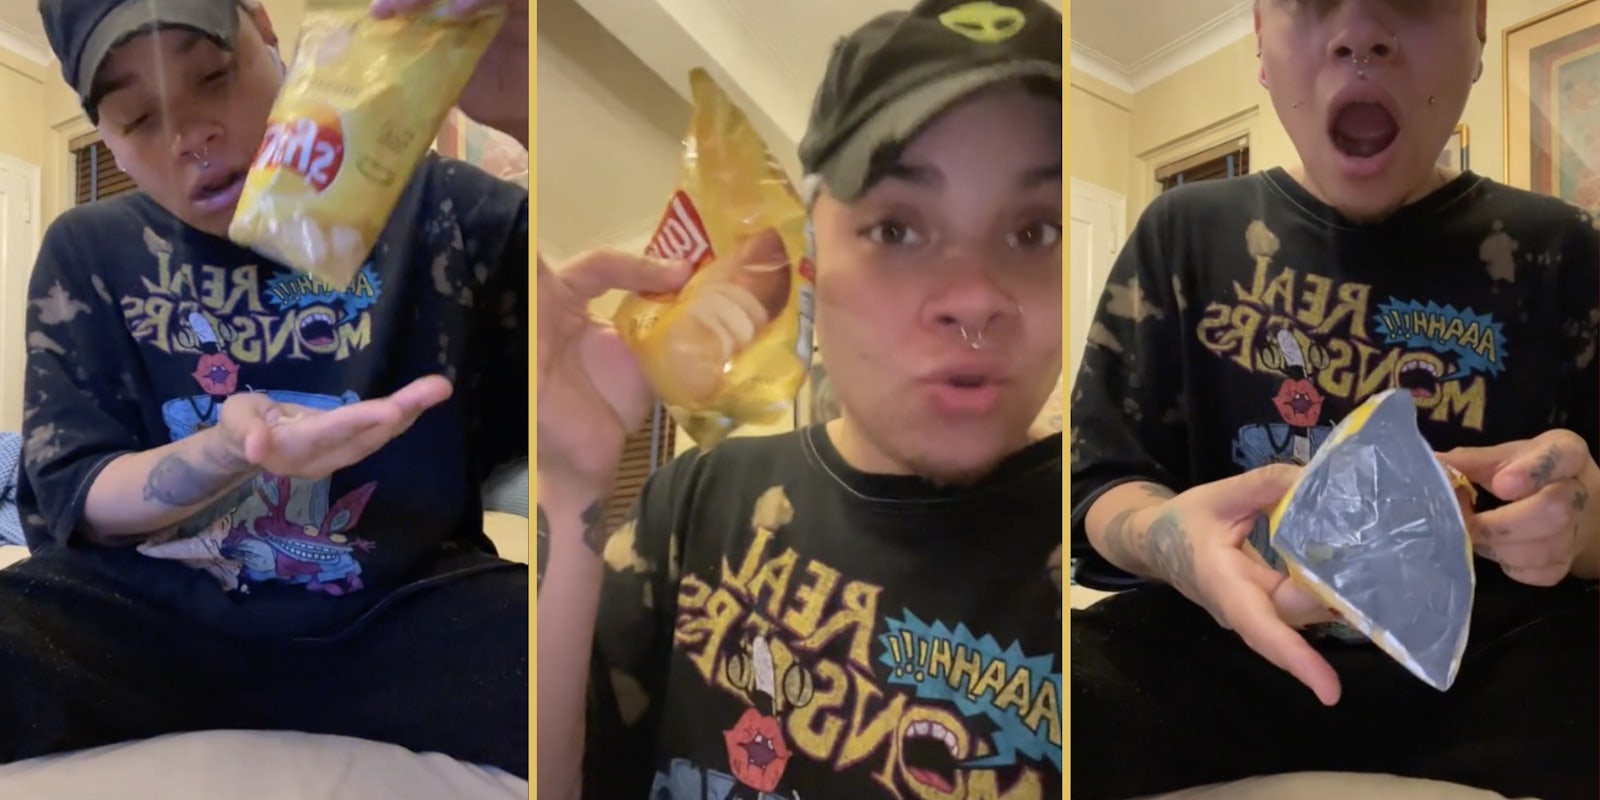 customer shows a small bag of Lay's potato chips they purchased, they open it to reveal a completely empty bag, save for a few crumbs